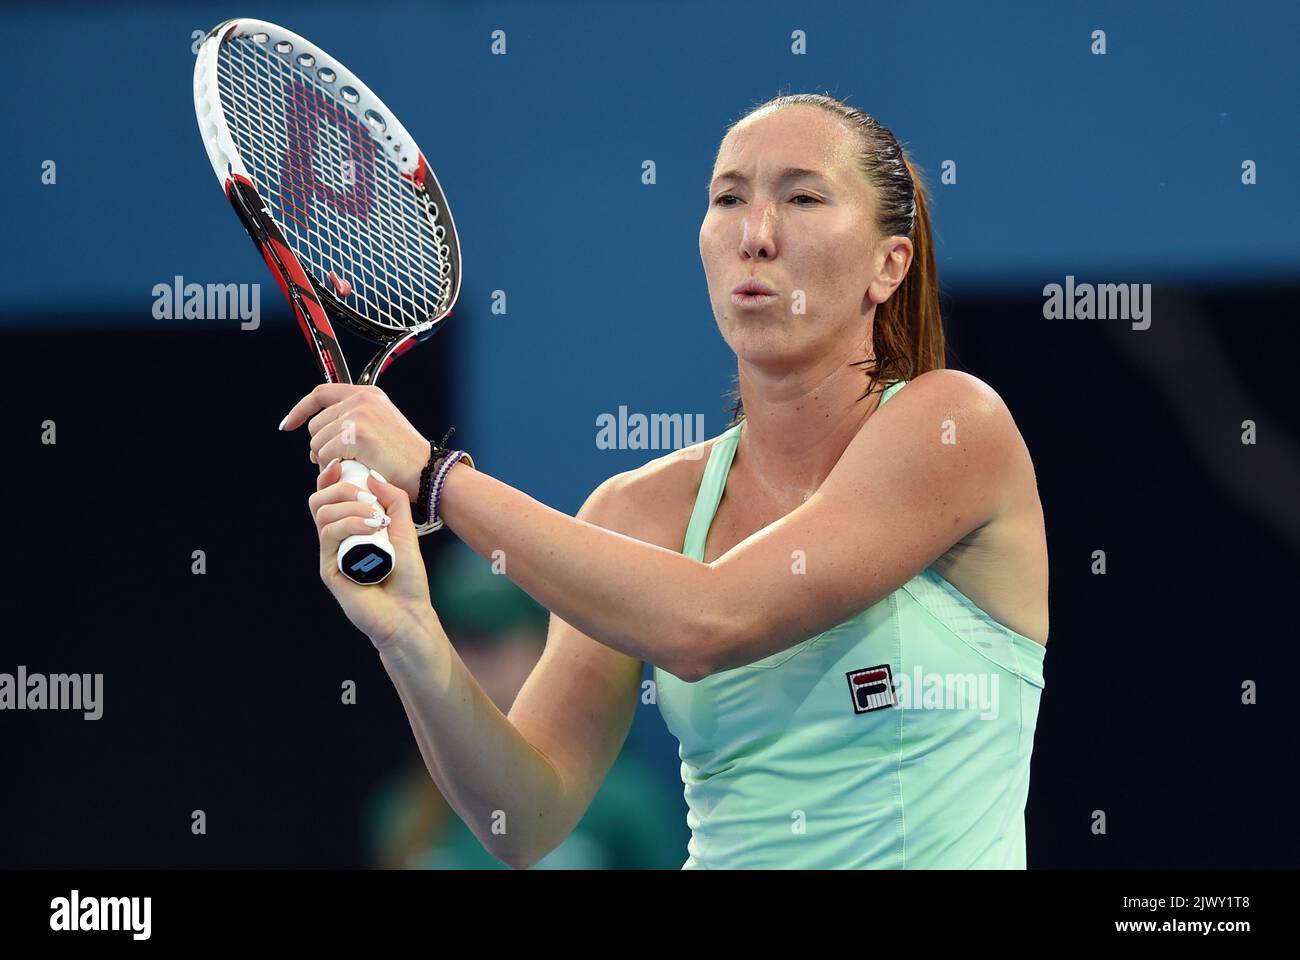 Jelena Jankovic reacts after losing a point in her women's final match  against Serena Williams on day fourteen at the U.S. Open Tennis  Championships at the U.S. National Tennis Center in Flushing